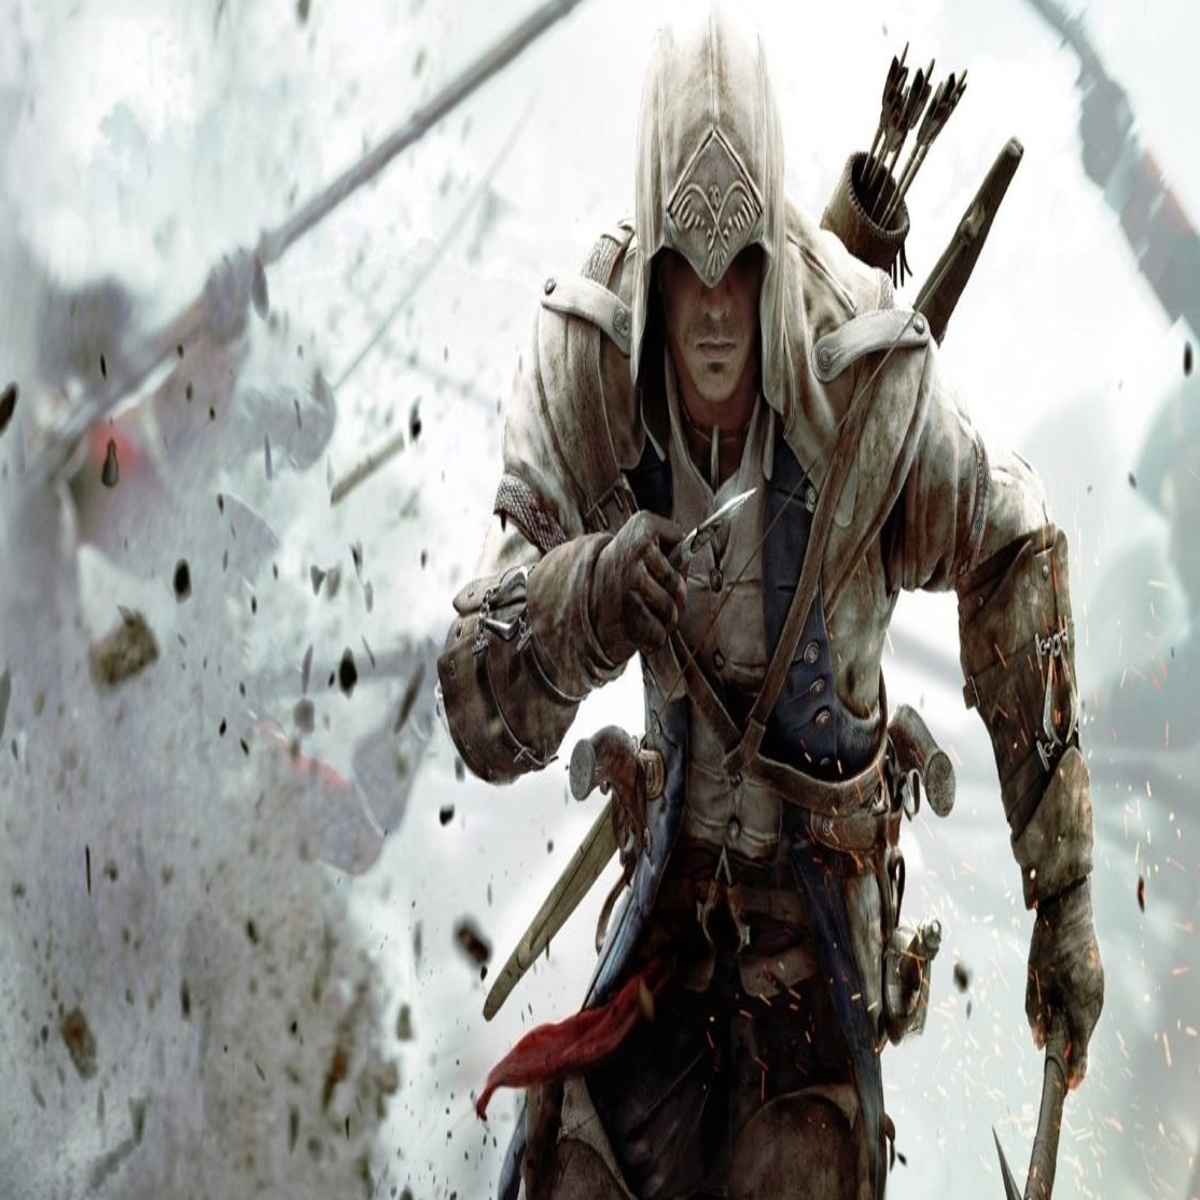 Assassins Creed 3 III Remastered + Liberation PS4 Playstation 4 Brand New